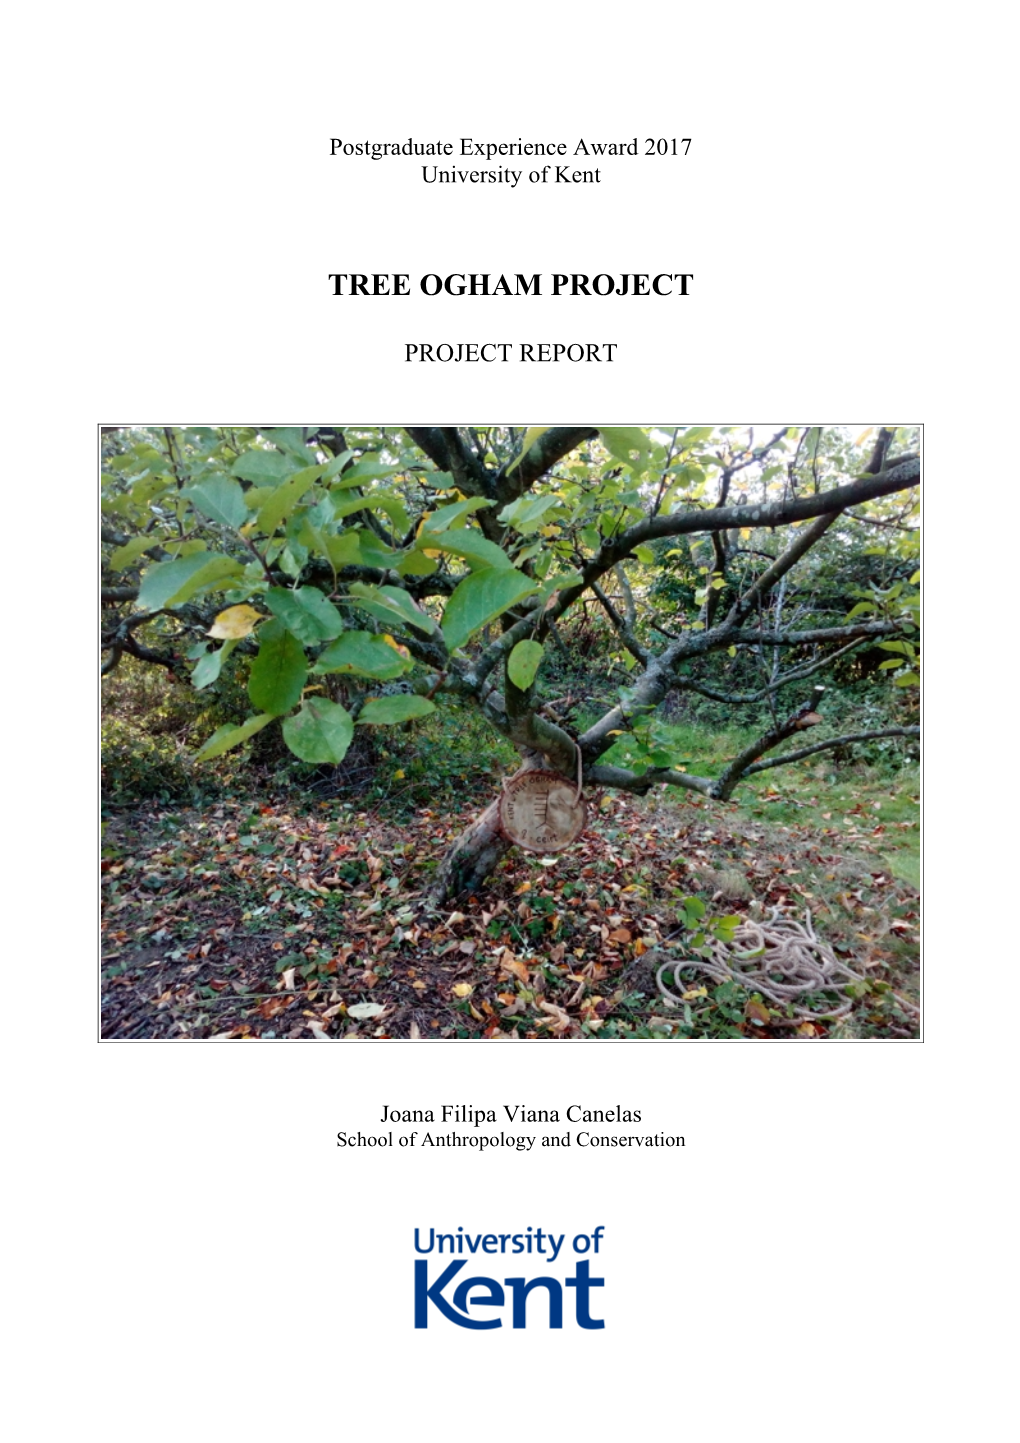 Tree Ogham Project